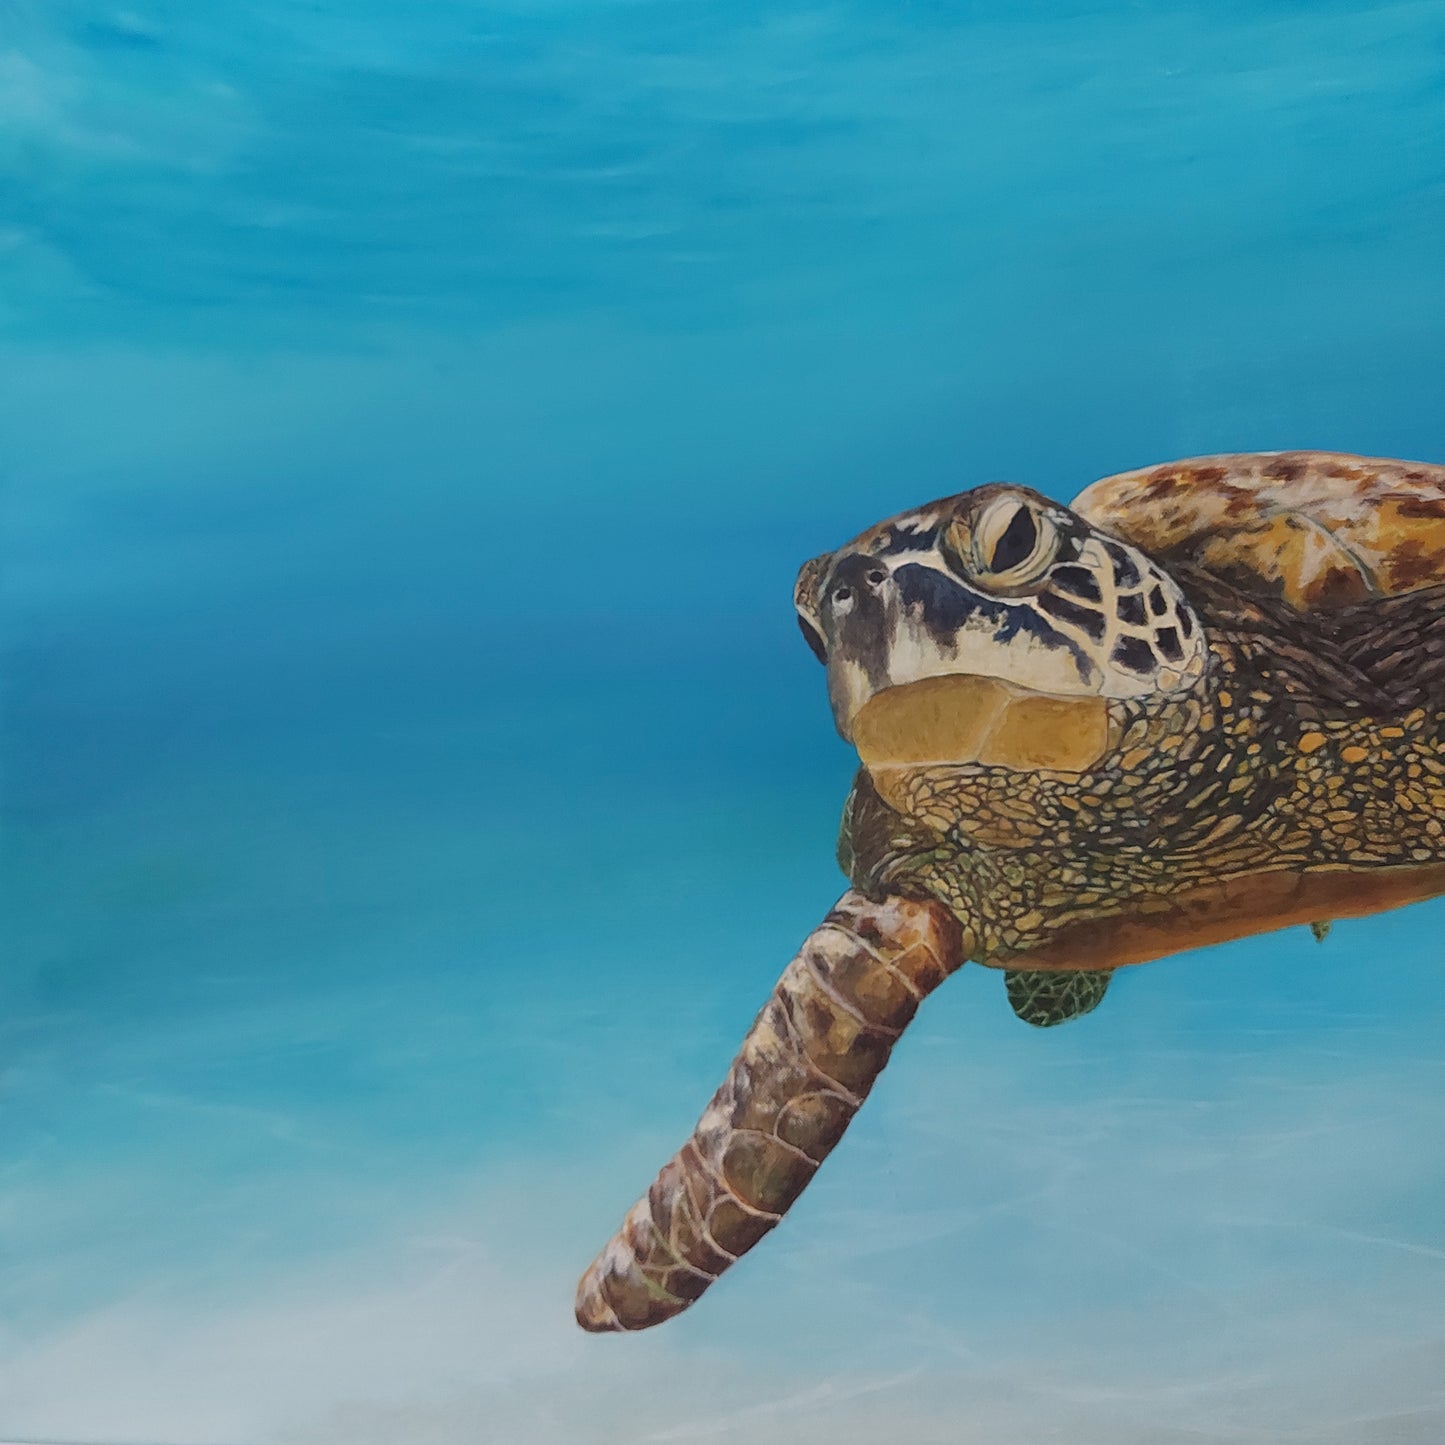 Colours of Life is an acrylic painting on canvas by Katherine Polack of a giant sea turtle underwater. The turtle is facing the viewer, gliding and swimming gracefully to remind us of the beauty and colours that exist in this world. The painting is 24 x 36" acrylic on canvas